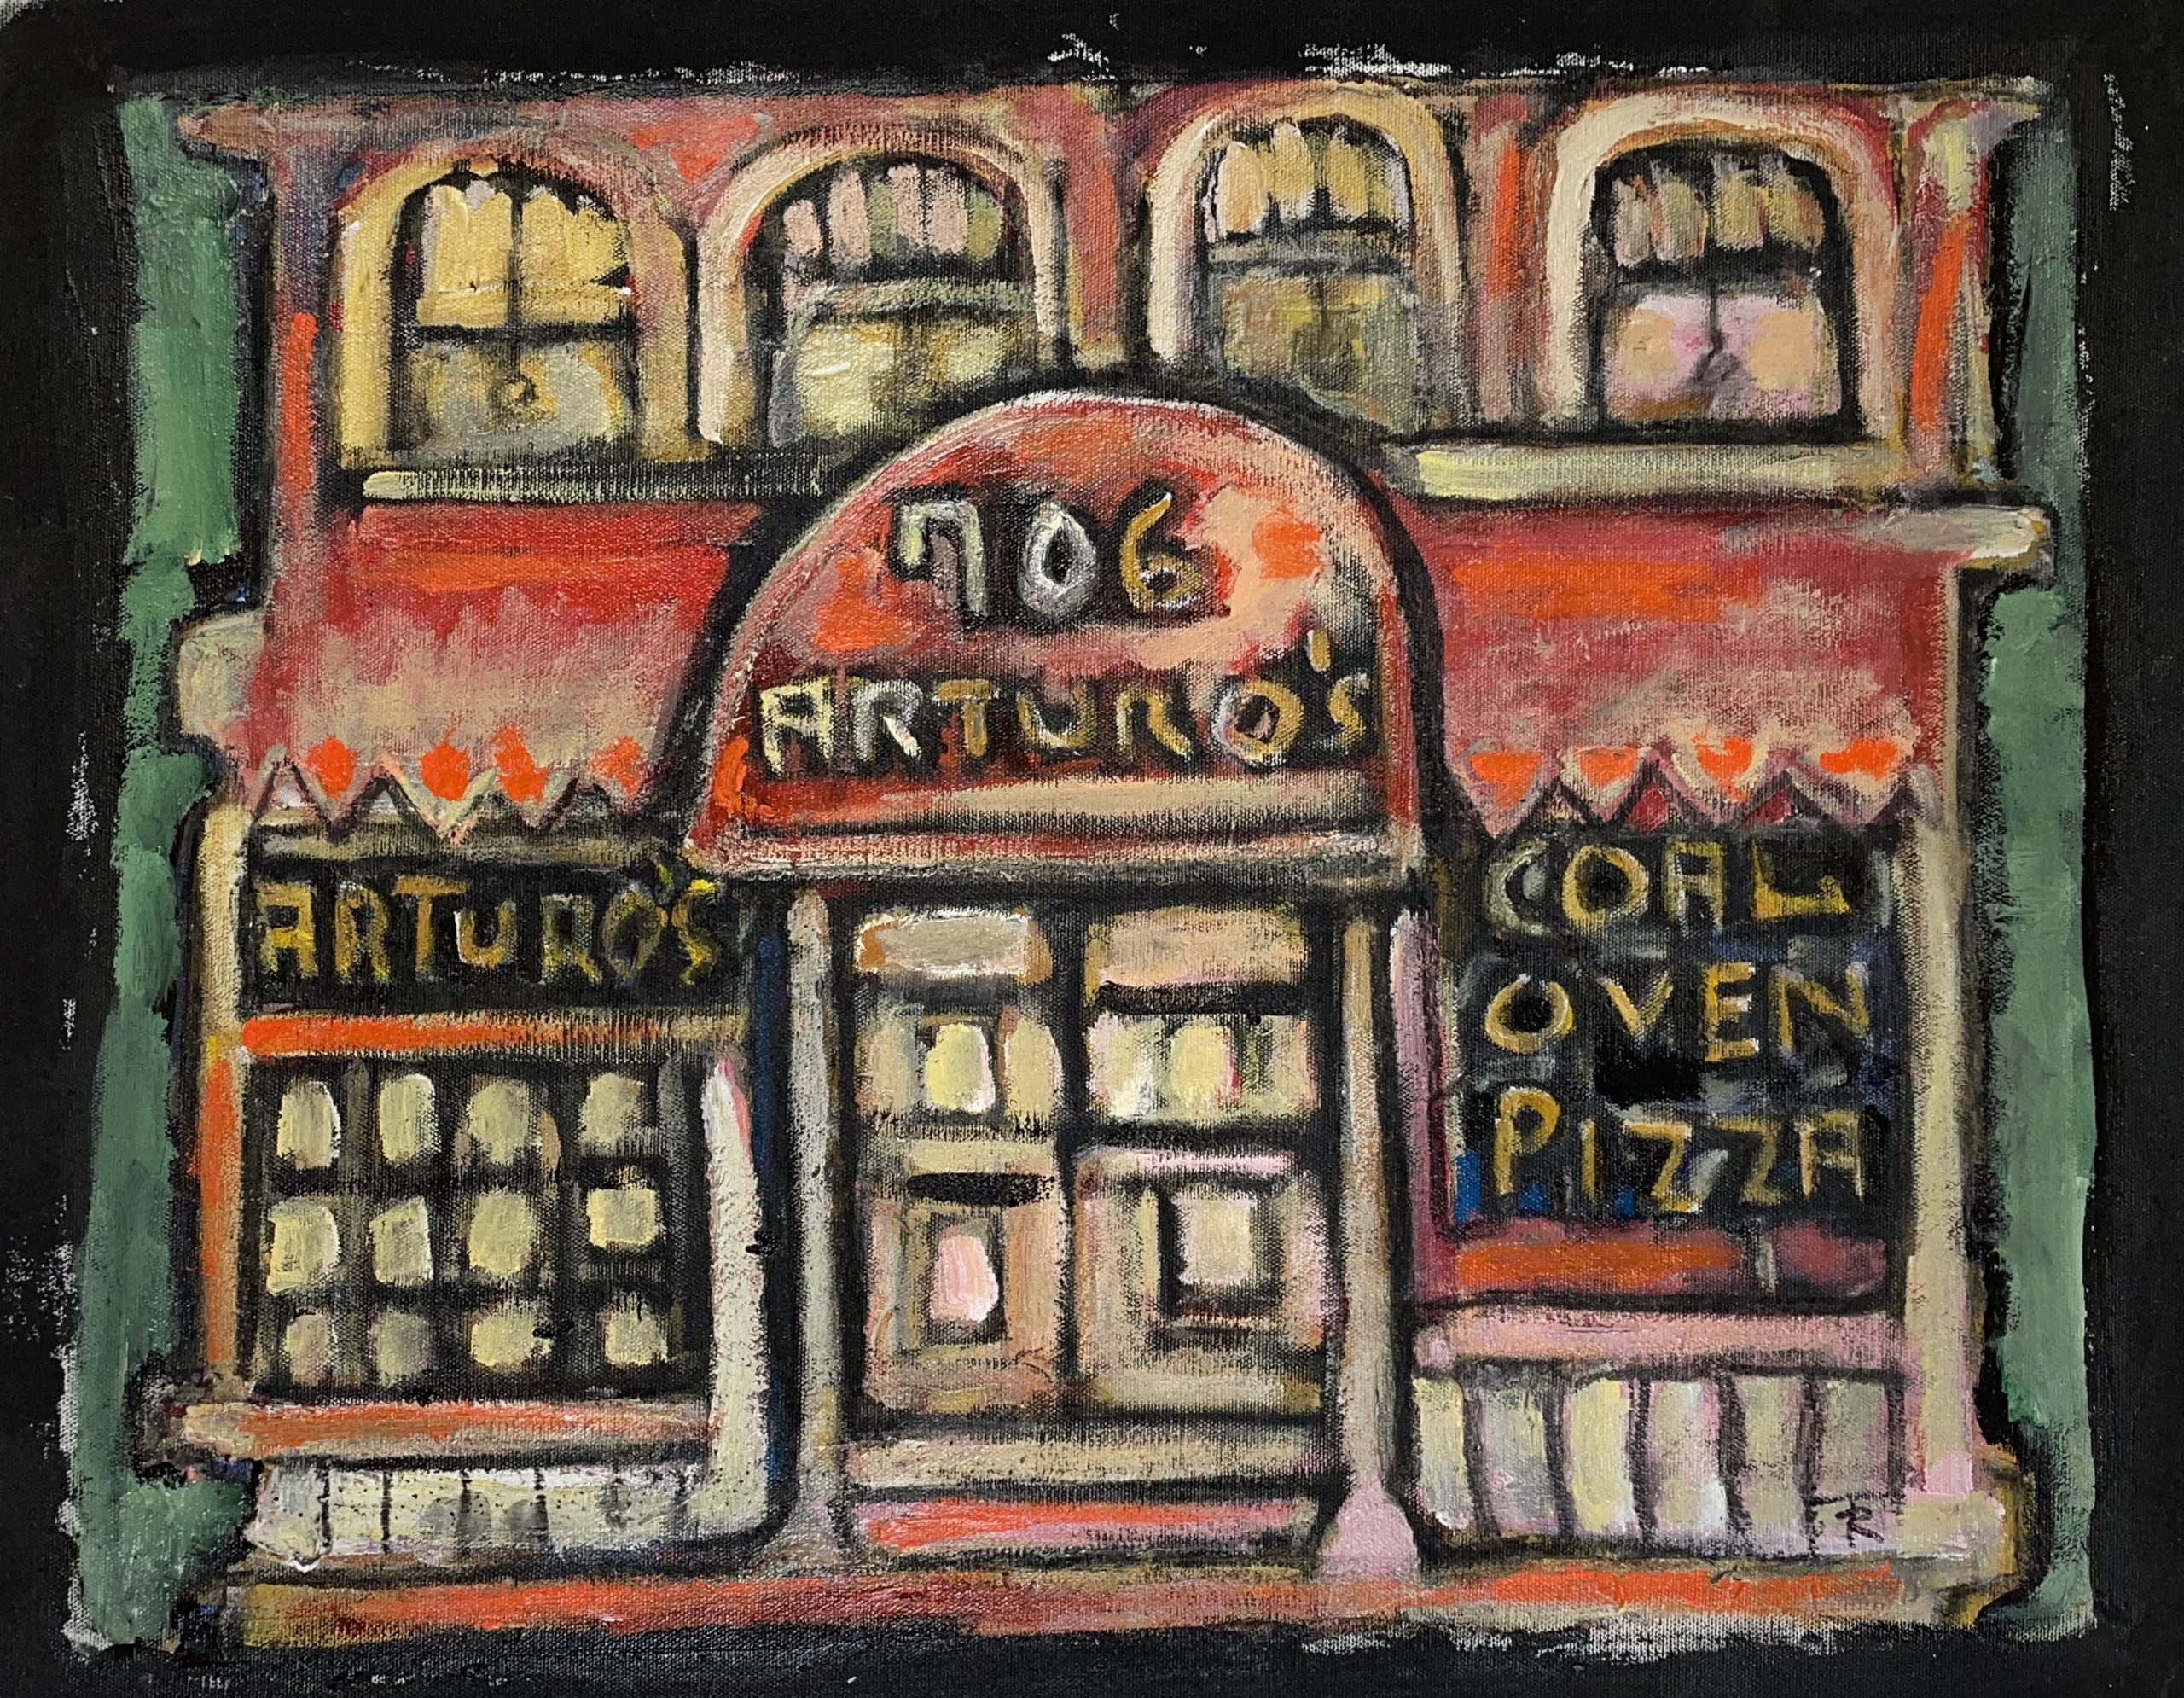 Tom Russell, Arturo’s coal-oven pizza 706 W Houston, NYC, 2018, acrylic on canvas, 45×40 cm